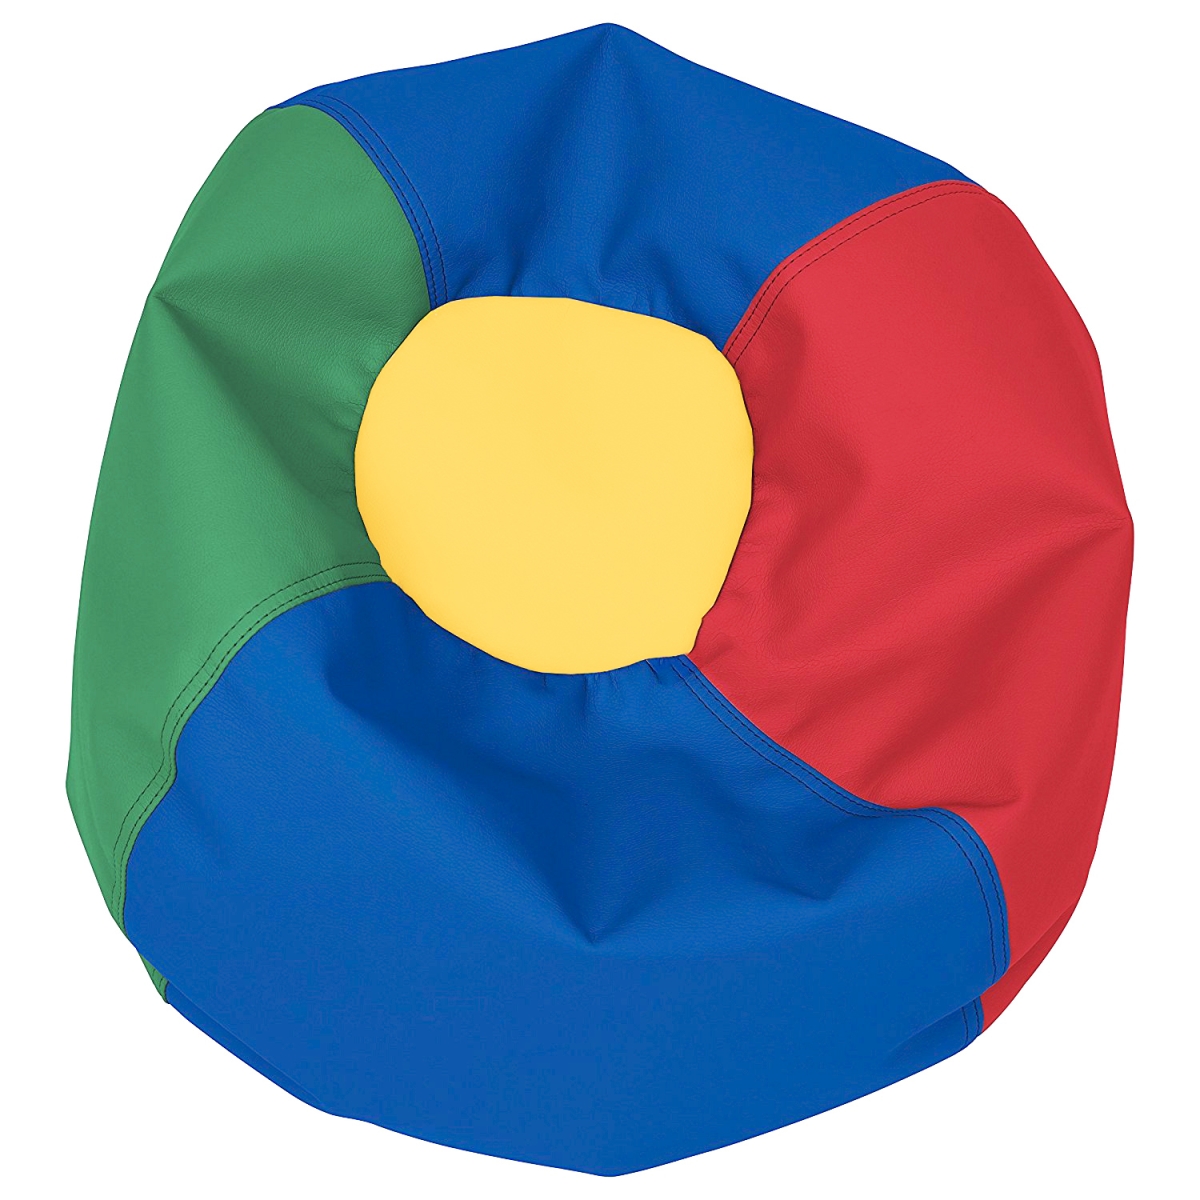 10476-as 22 In. Classic Toddler Bean Bag - Assorted Color